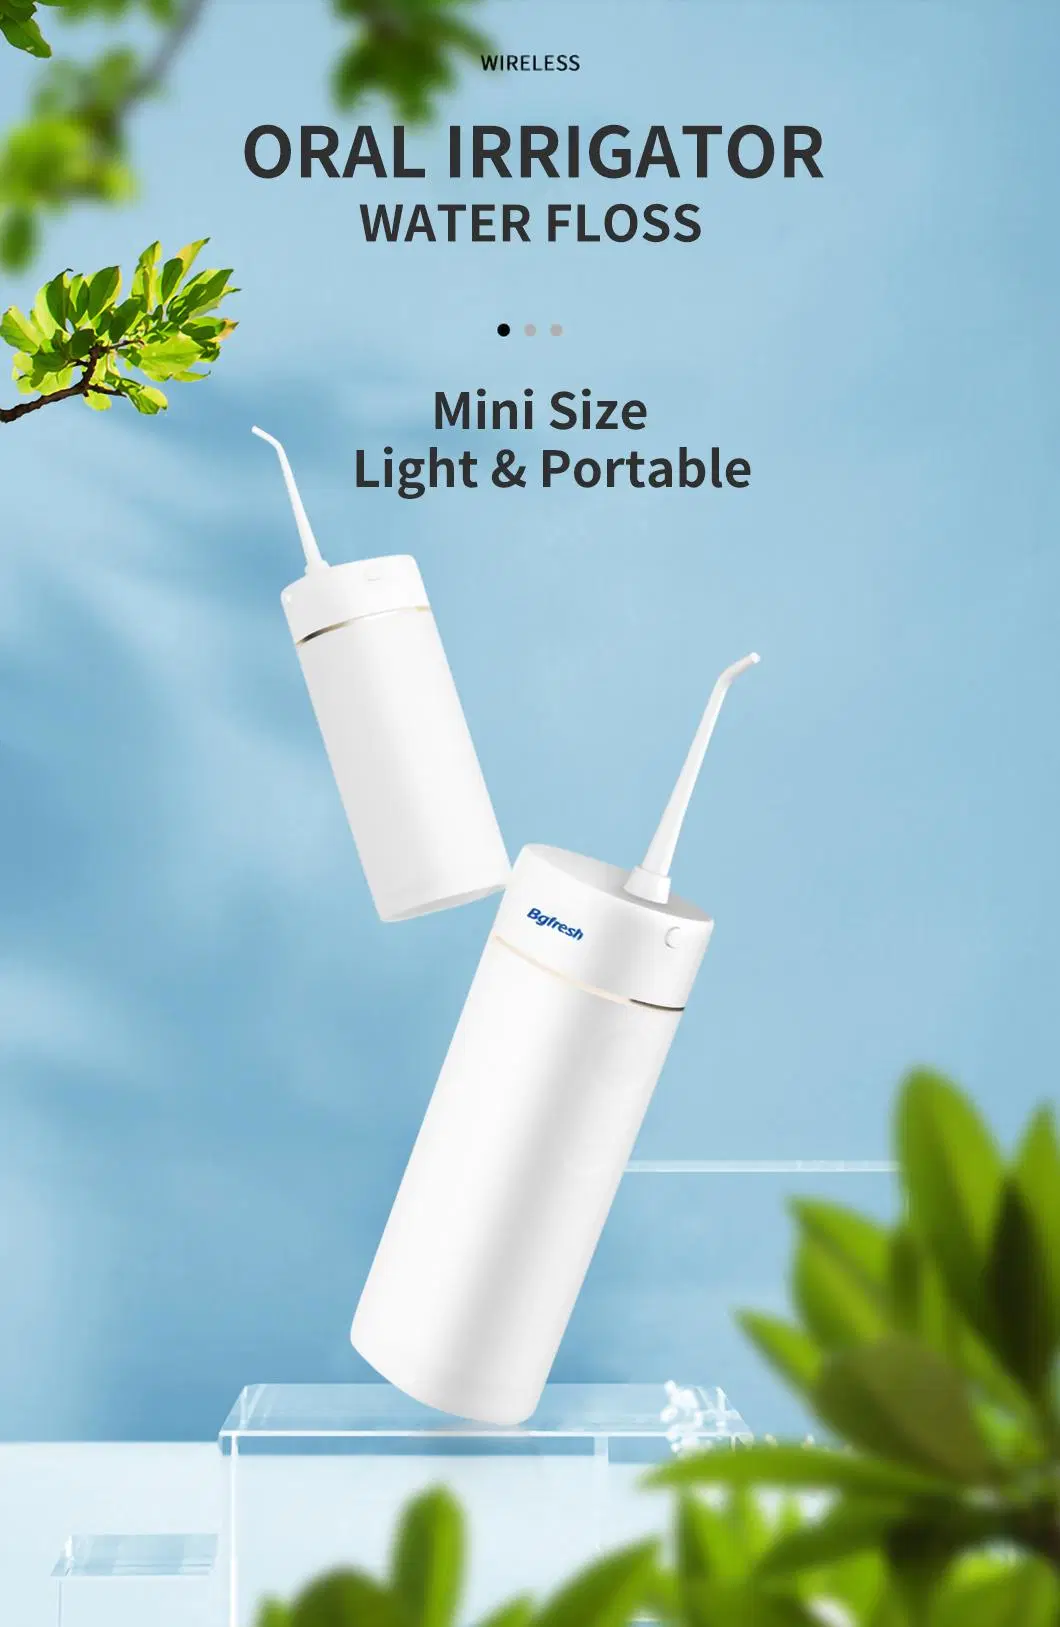 Dental Care Product 190ml Ipx7 Waterproof Cordless Dental Oral Irrigator Portable and Rechargeable Water Flossing Water Flosser Good for Travel 18